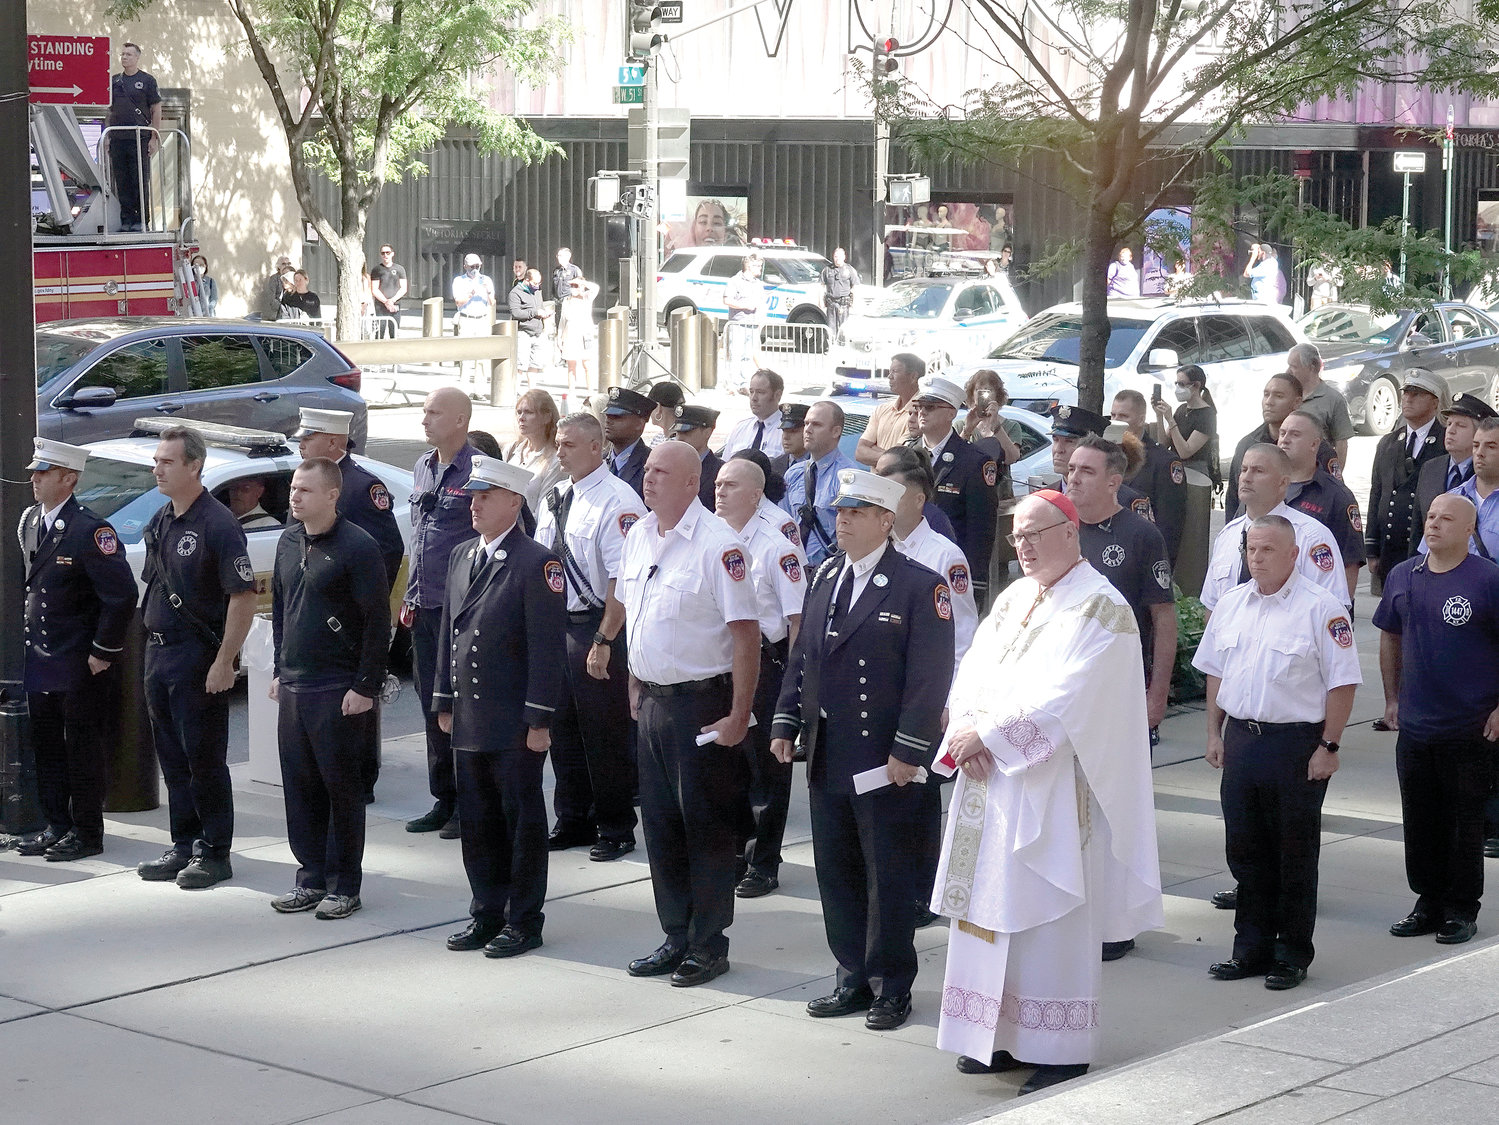 IN SOLIDARITY—Cardinal Dolan gathers with members of the FDNY outside St. Patrick’s Cathedral before a morning Mass he celebrated Sept. 11 for them and for families of firefighters who were killed in the terror attacks on the World Trade Center two decades ago on 9/11.